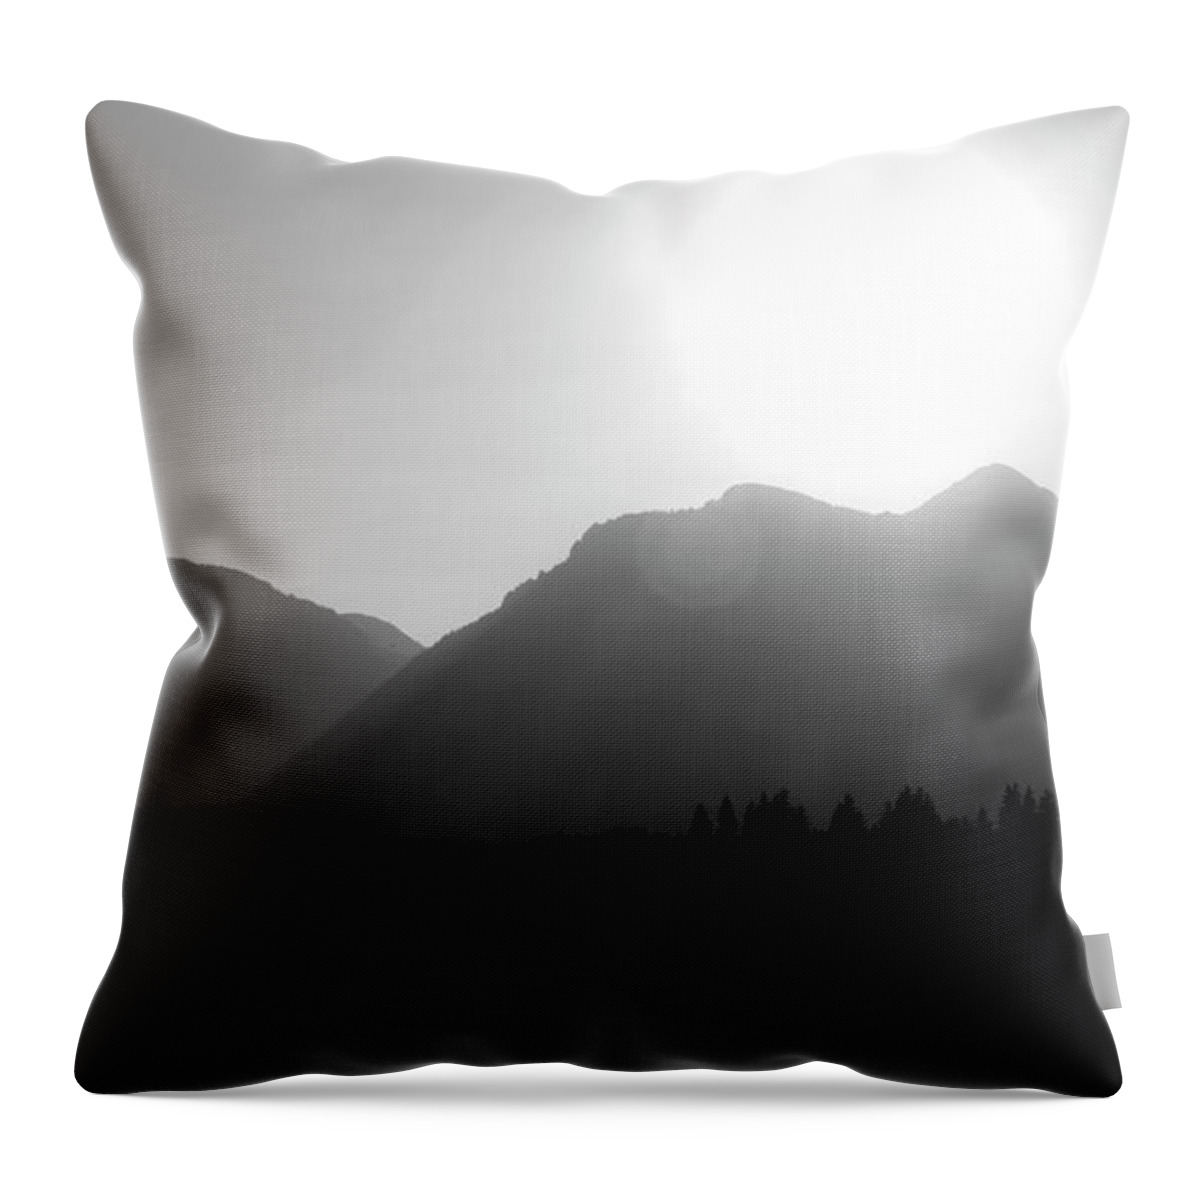 Monochrome Mountain Moment Throw Pillow featuring the photograph Monochrome Mountain Moment by Dan Sproul